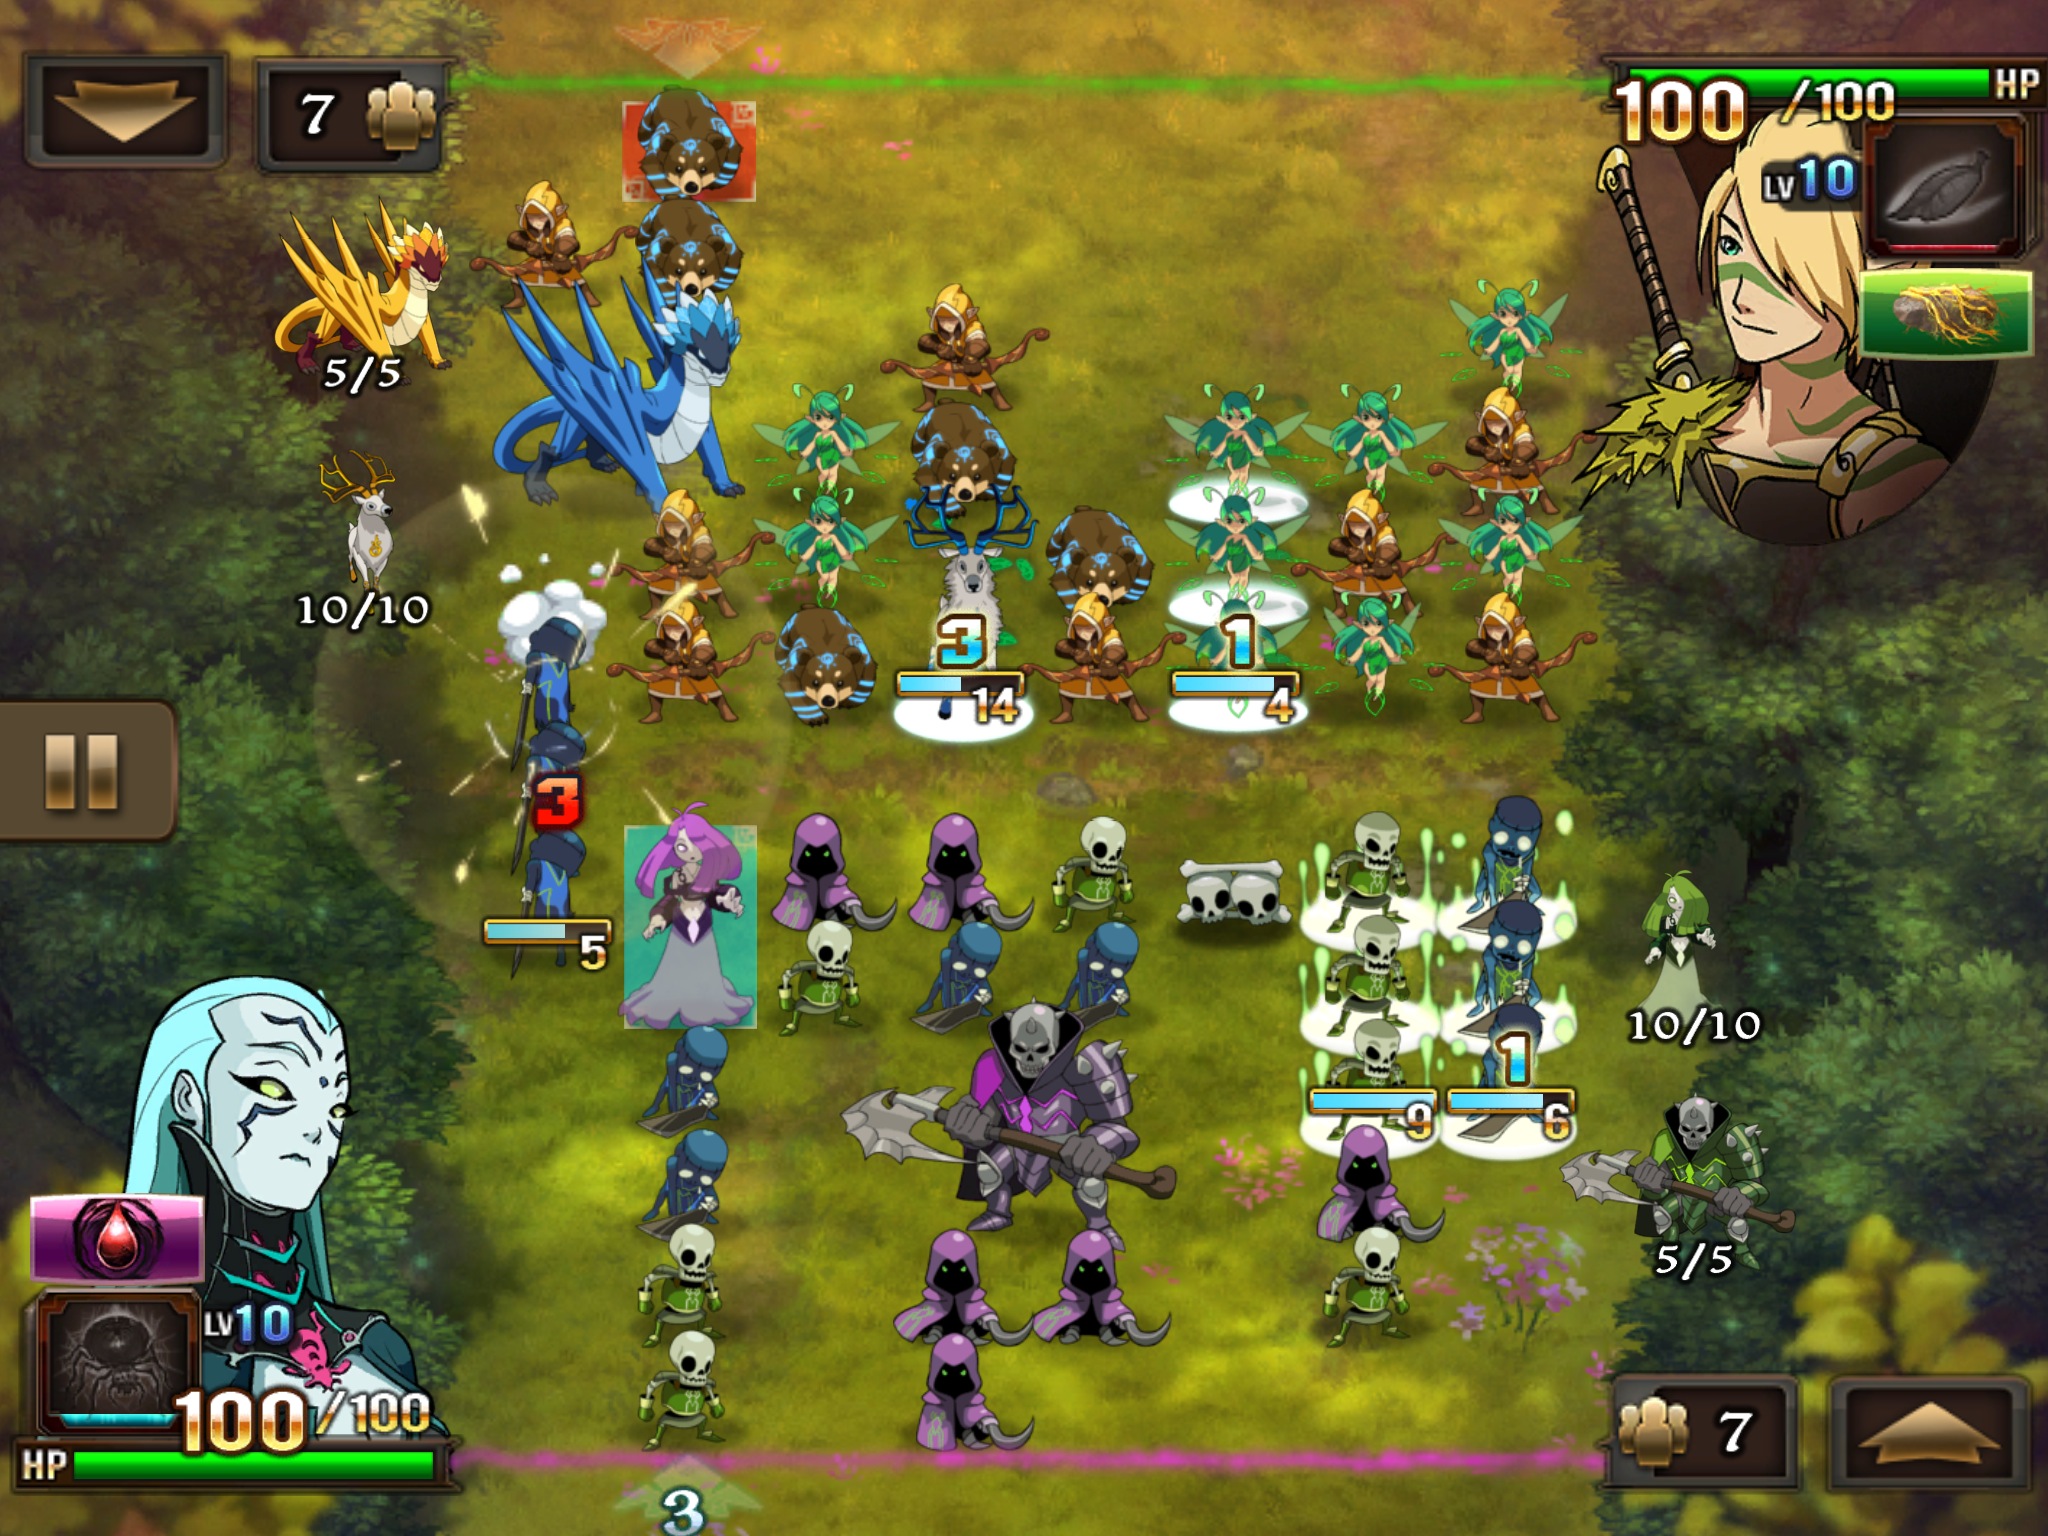 Heroes of might and magic 1 free. download full version for windows 7